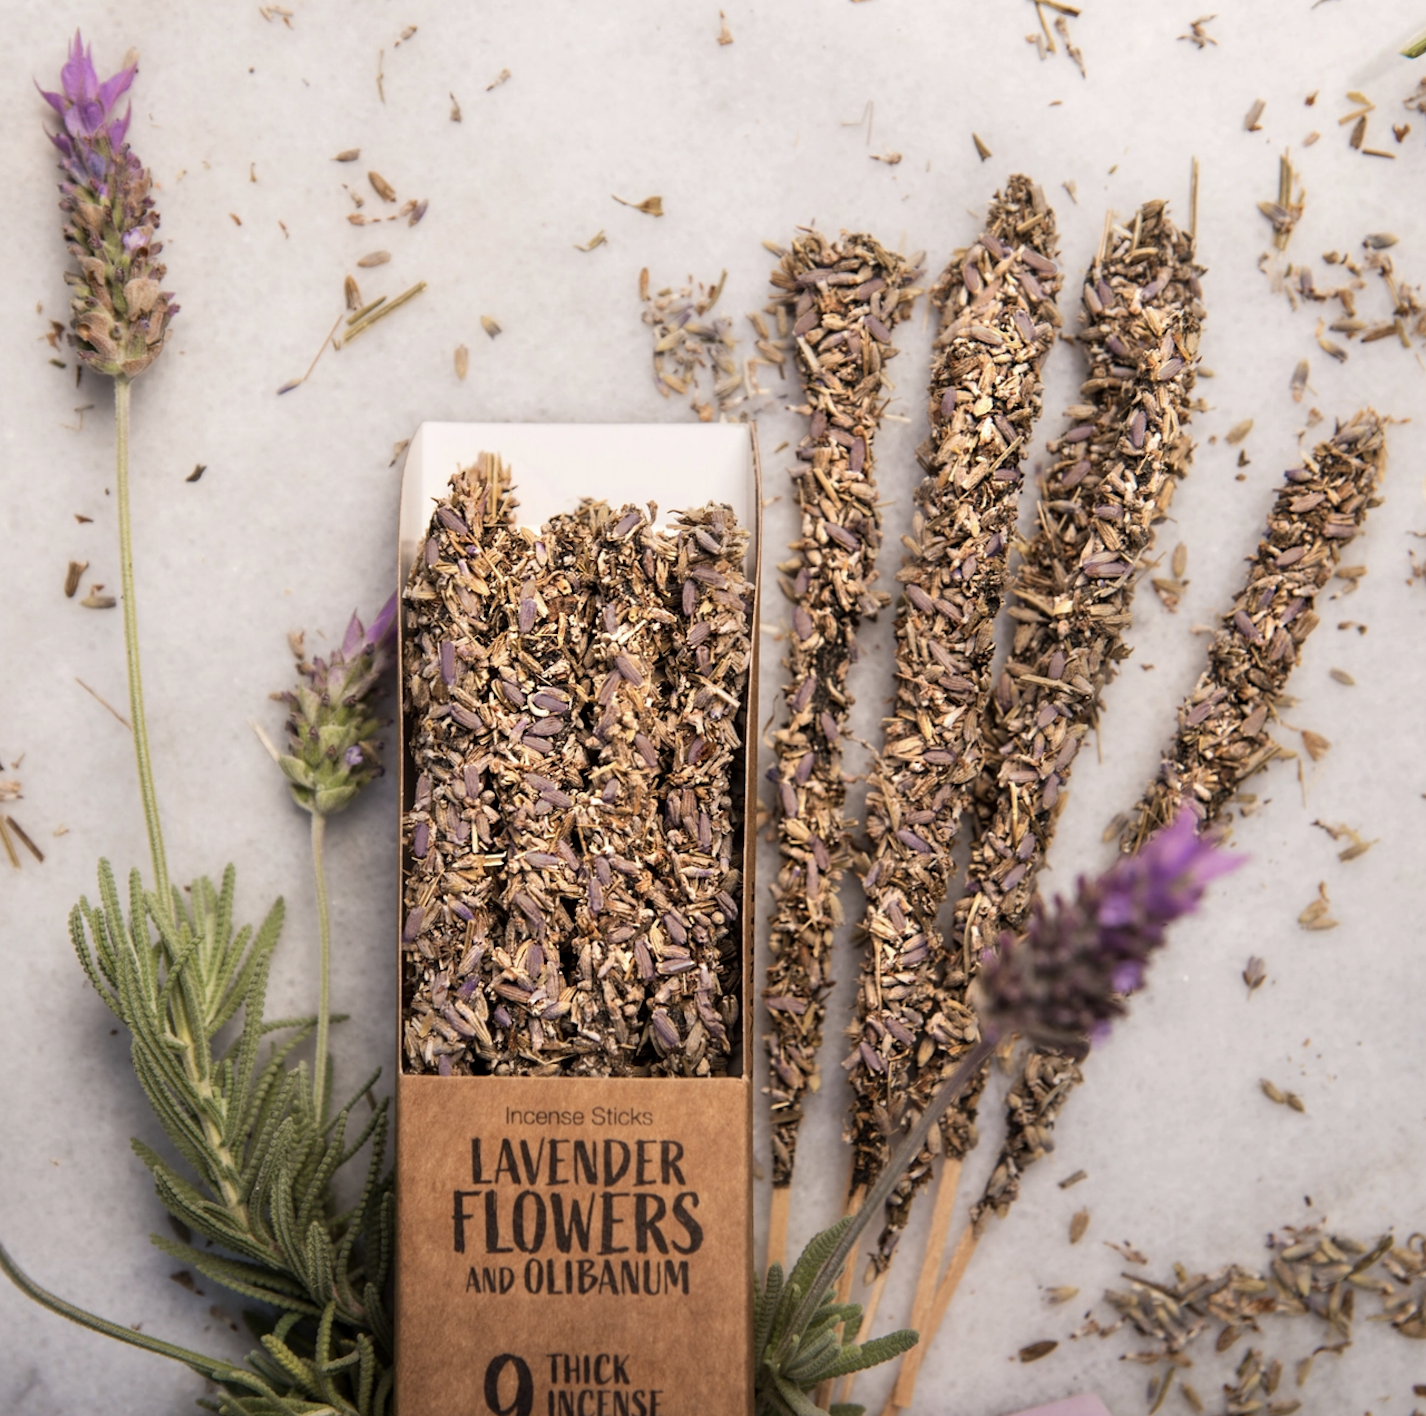 Lavender and Olibanum Incense Sticks. Each stick is hand formed around an Olibanum (Frankincense) resin base then carefully packed with whole flowers, herbs and/or petals. Leaving a gorgeously decorated incense stick that is as impressive to see as it is to smell.